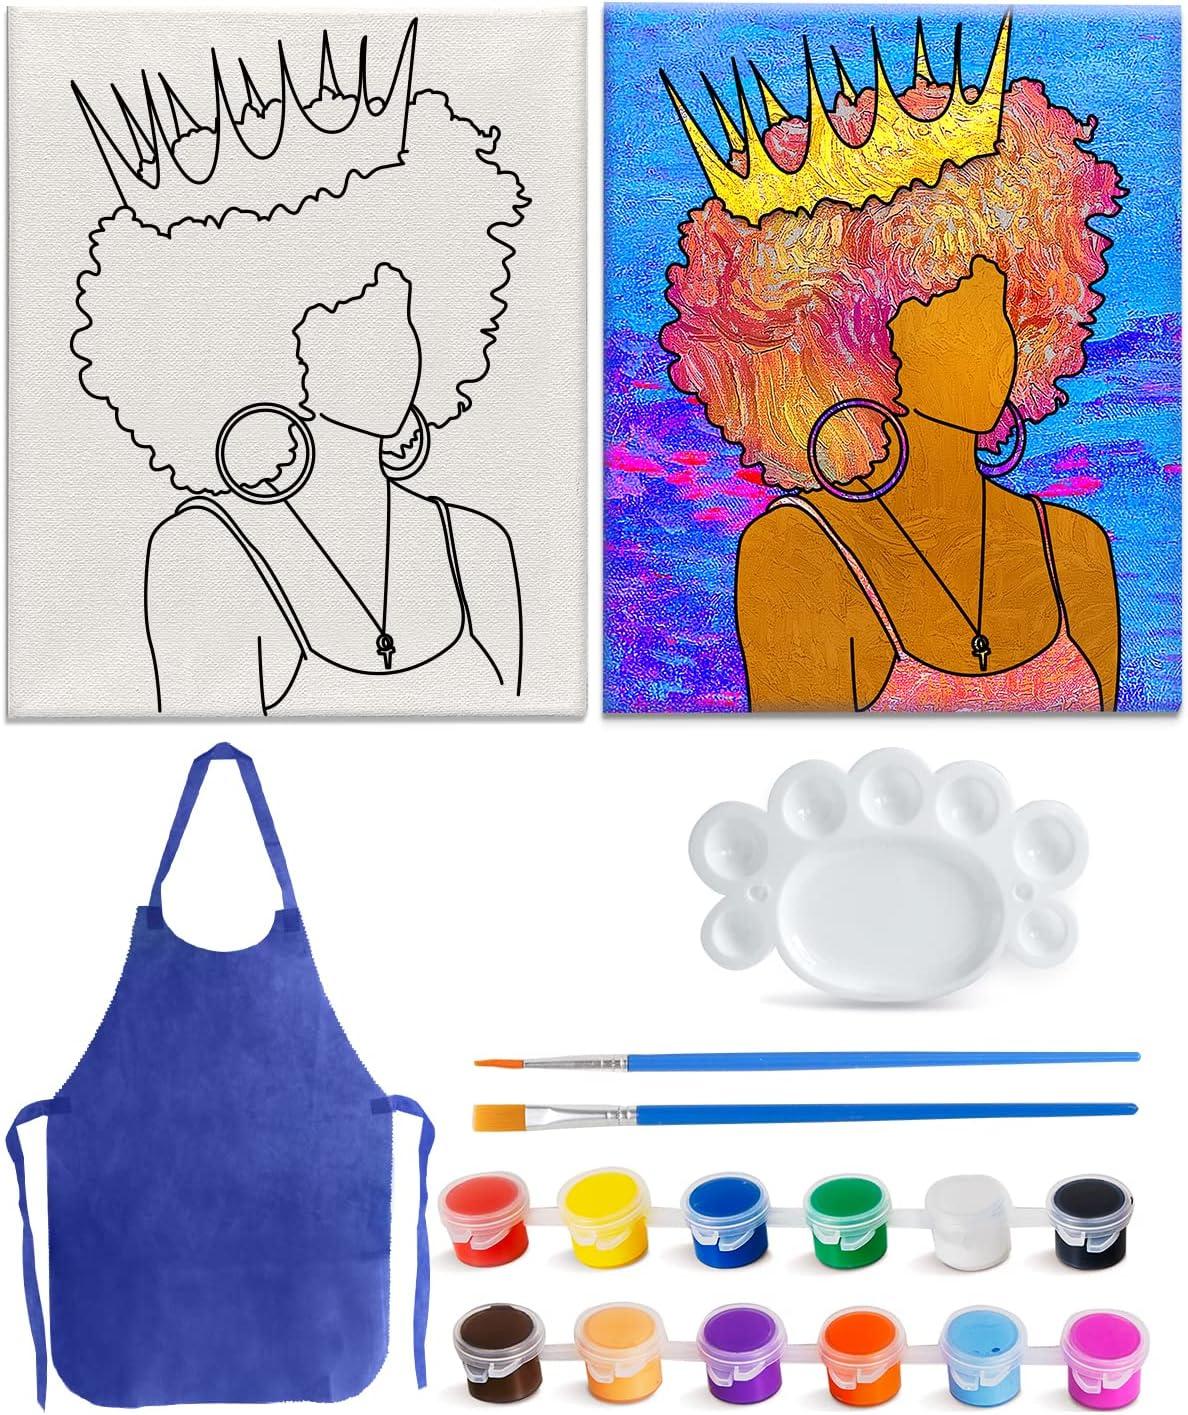  VALLSIP Paint and Sip Canvas Painting Kit Pre Drawn Canvas for  Painting for adults Stretched Canvas Couples Games Date Night Afro Queen Paint  Party Supplies Favor (8x10) : Handmade Products